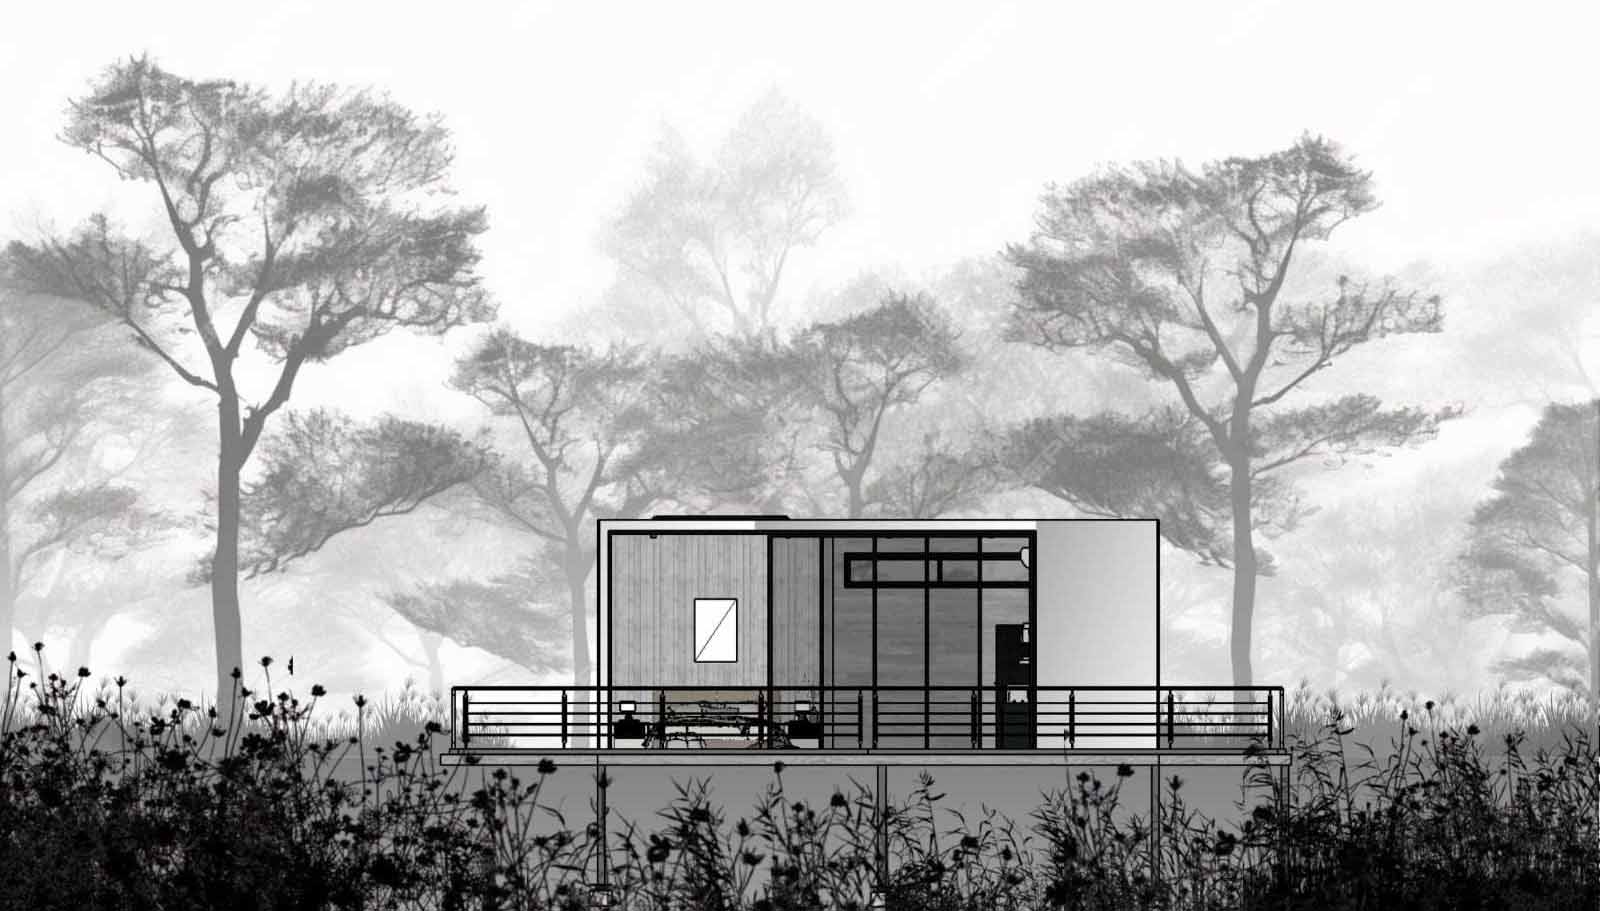 The architectural drawings of a small and modern cabin with a mirrored facade, which also includes a slide-out bed that can be inside or outside on the deck.